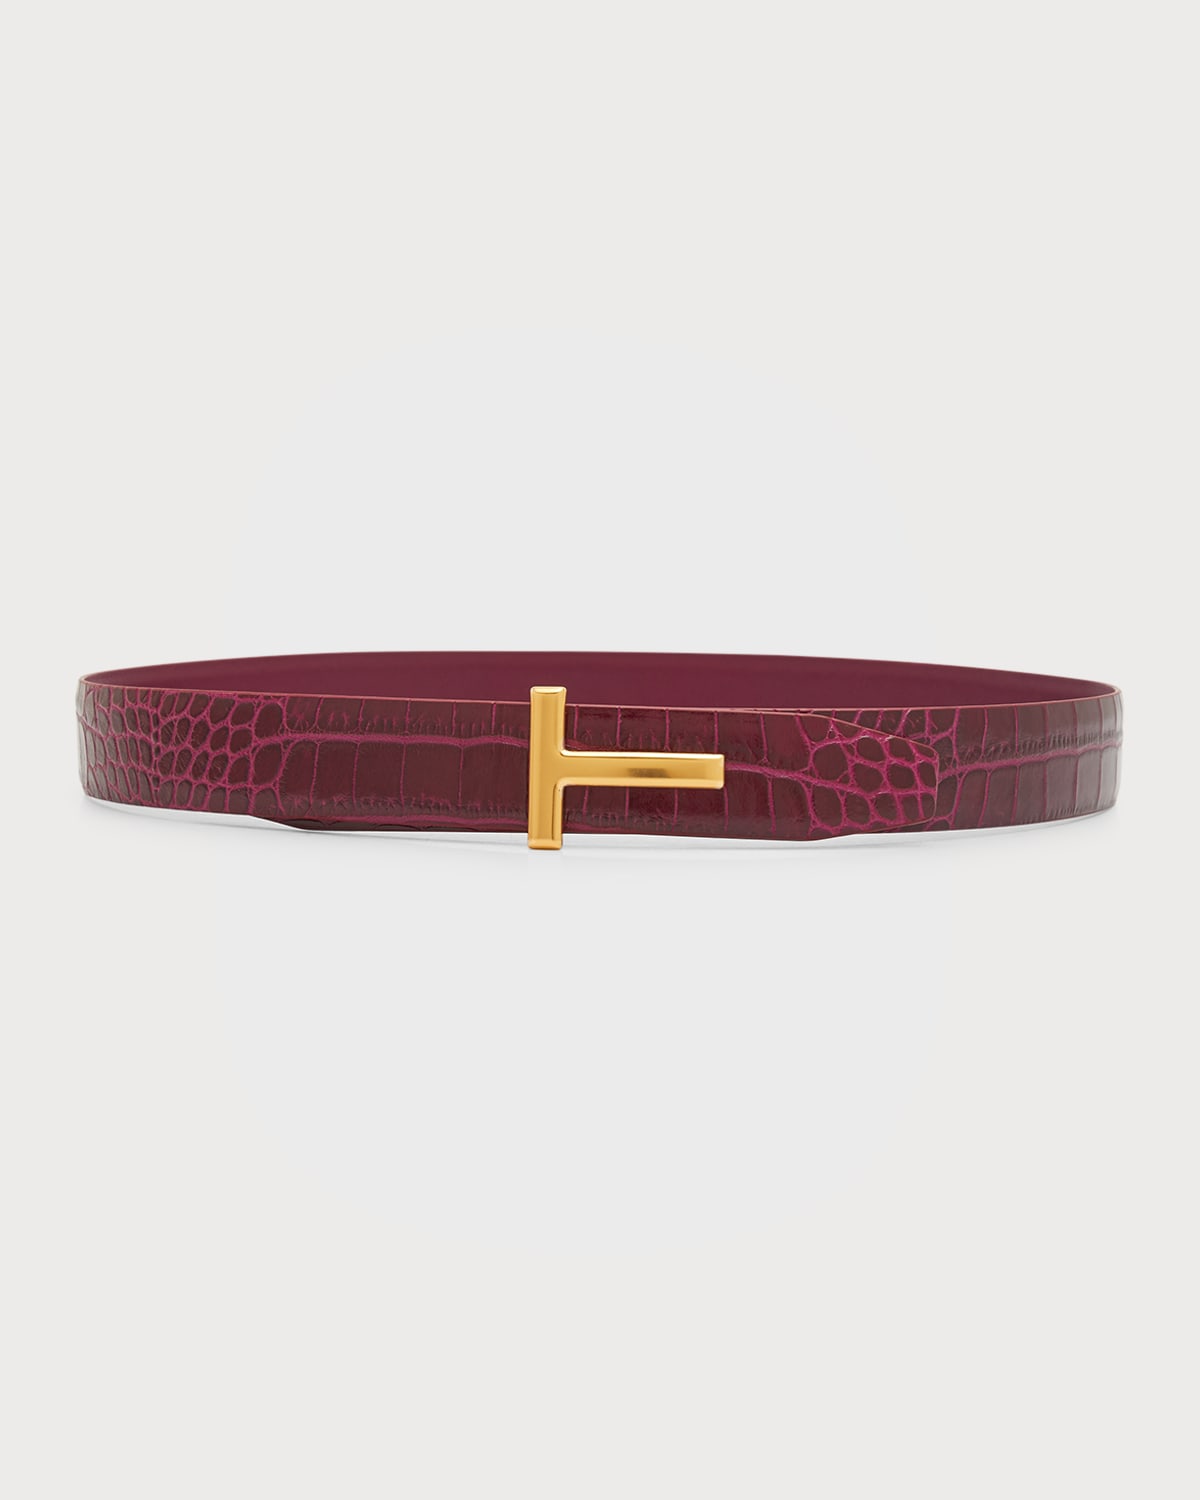 TOM FORD Men's Glossy Patent Leather T-Buckle Belt | Neiman Marcus